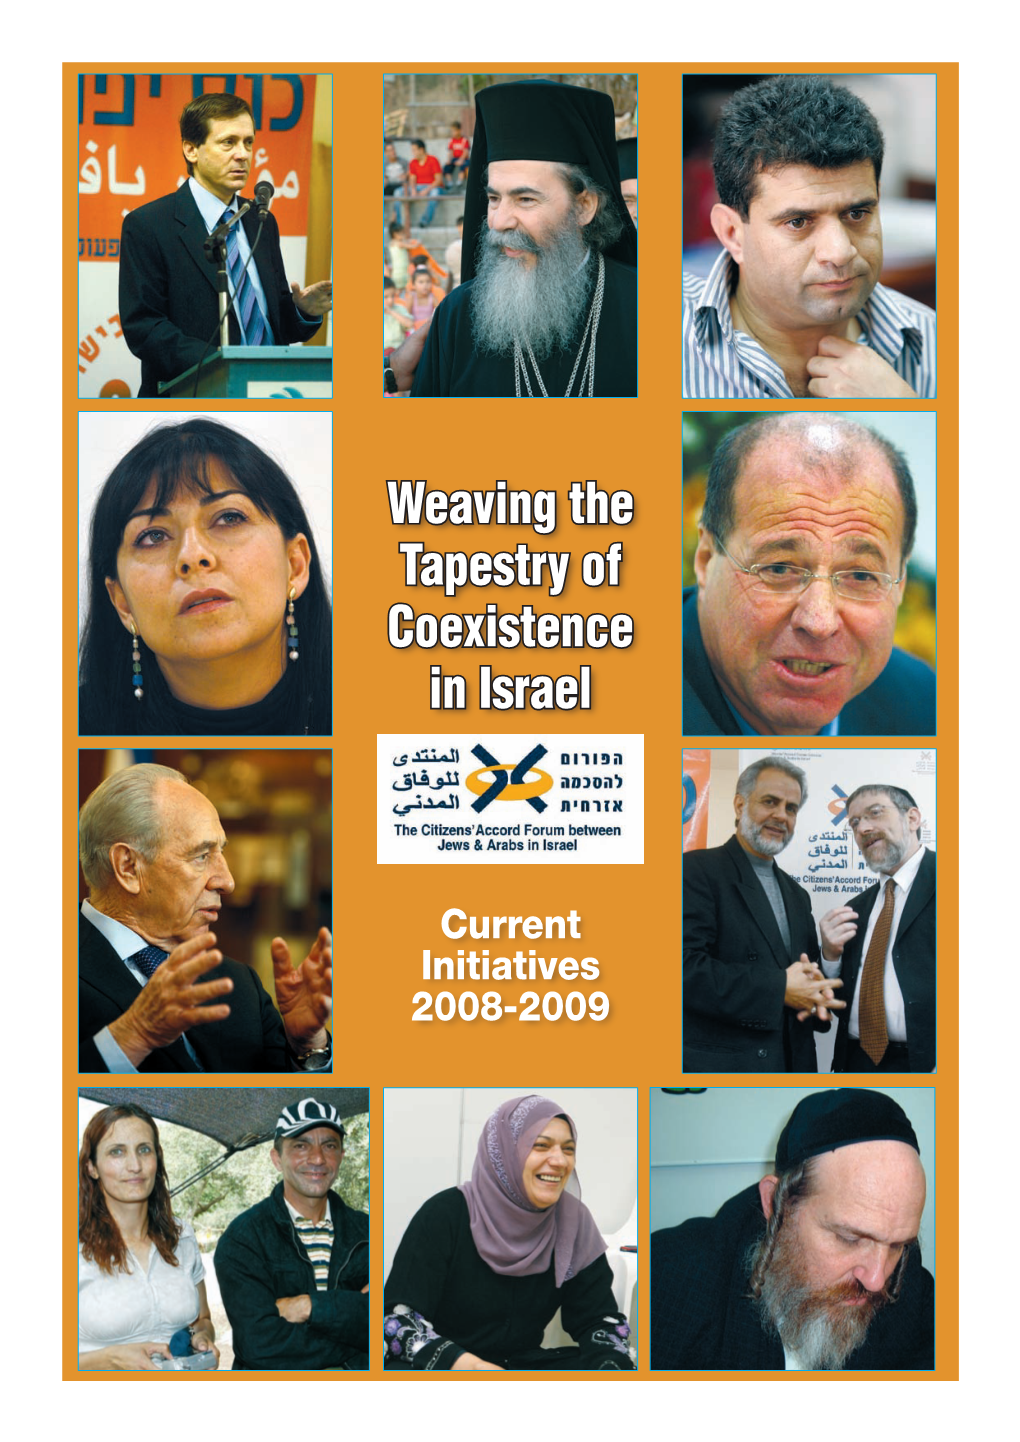 Weaving the Tapestry of Coexistence in Israel